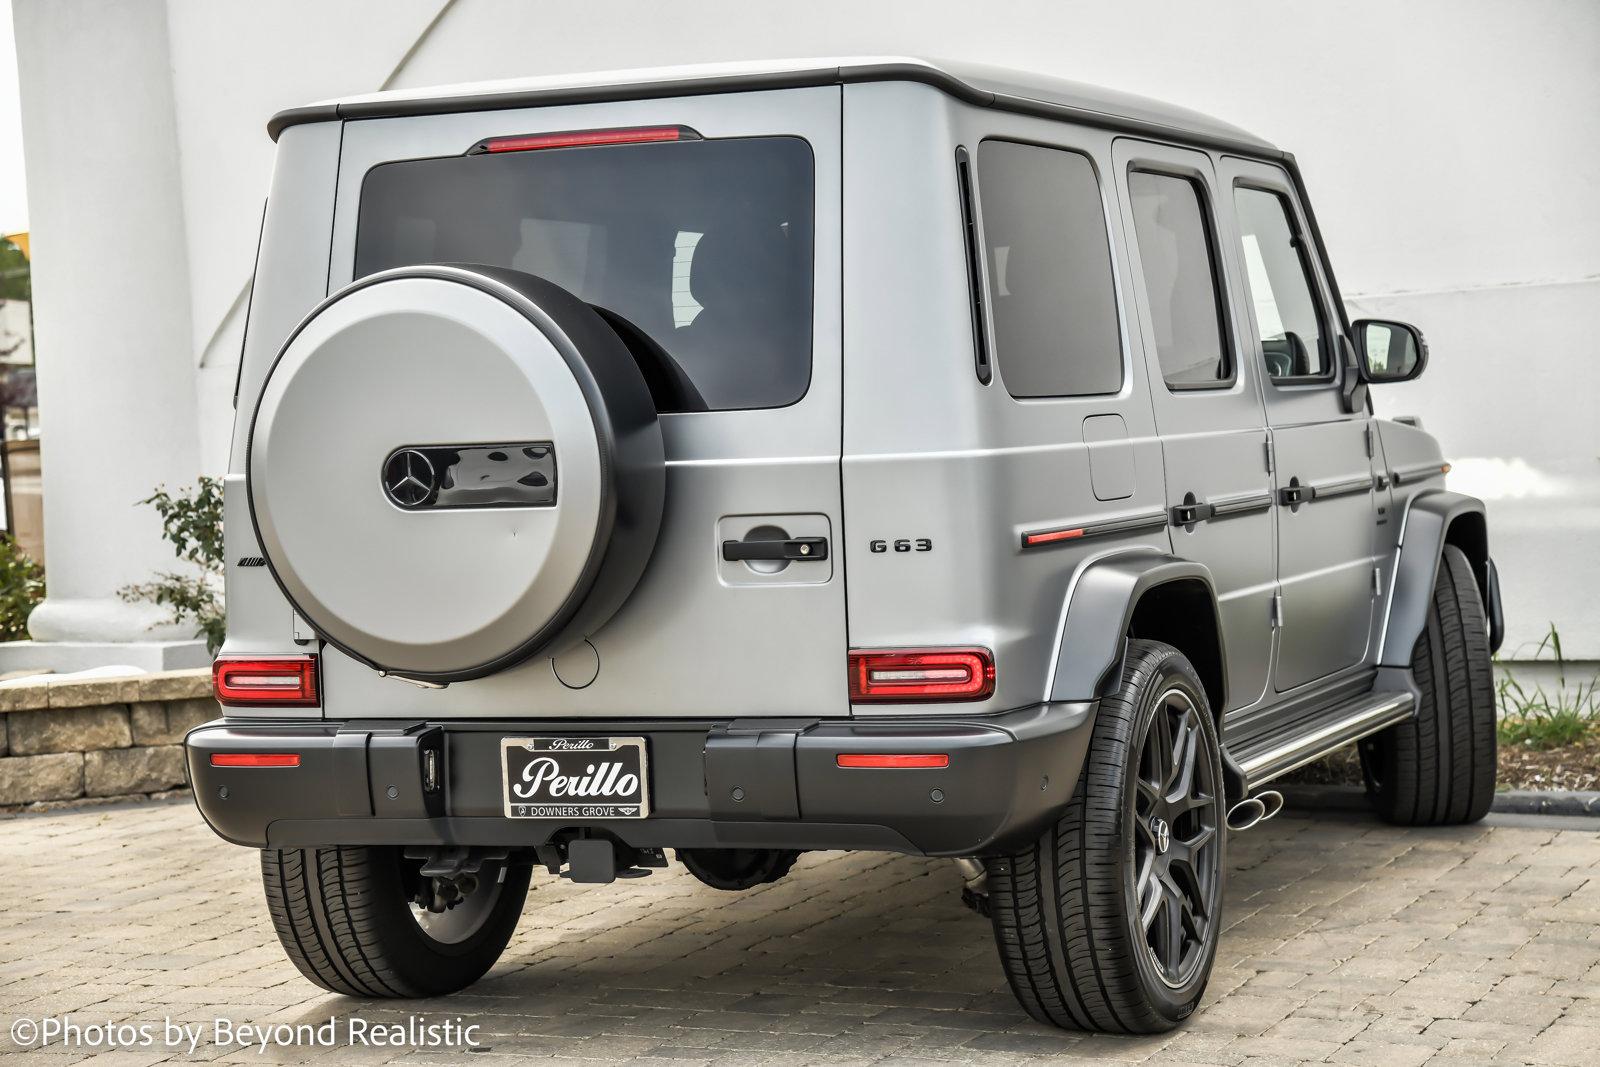 Used 2021 Mercedes-Benz G-Class AMG G 63, Exclusive Plus Pkg | Downers Grove, IL